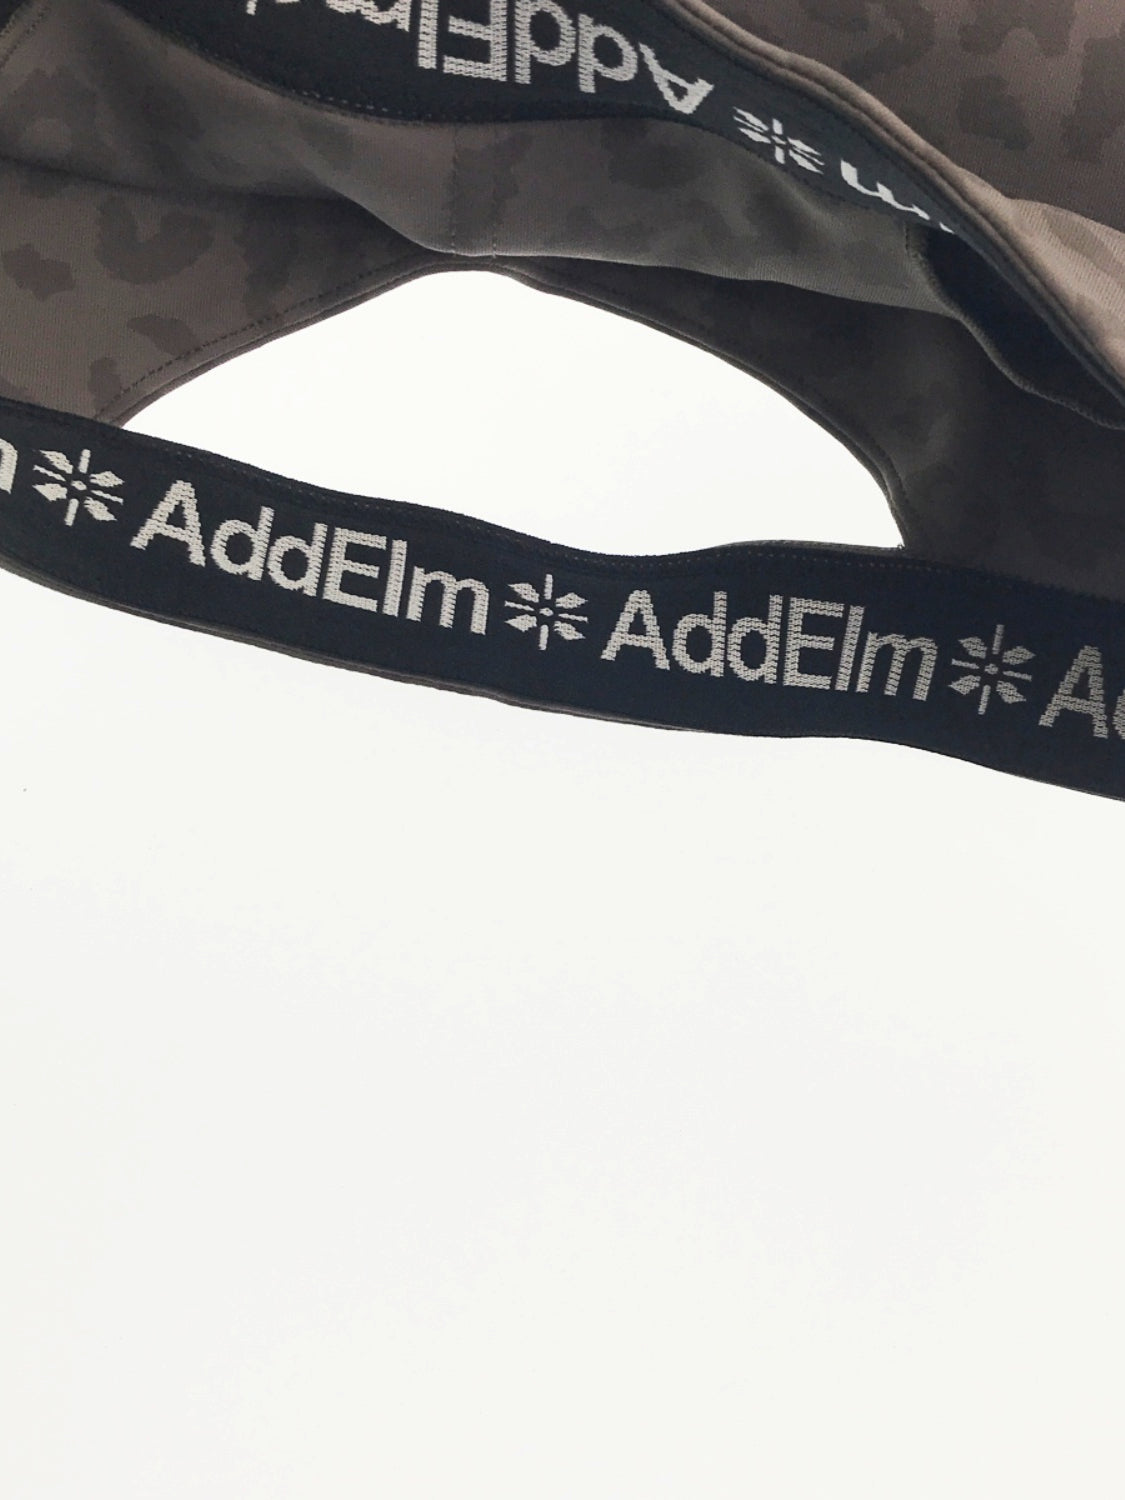 AddElm(add03)  レオパードブラTOP